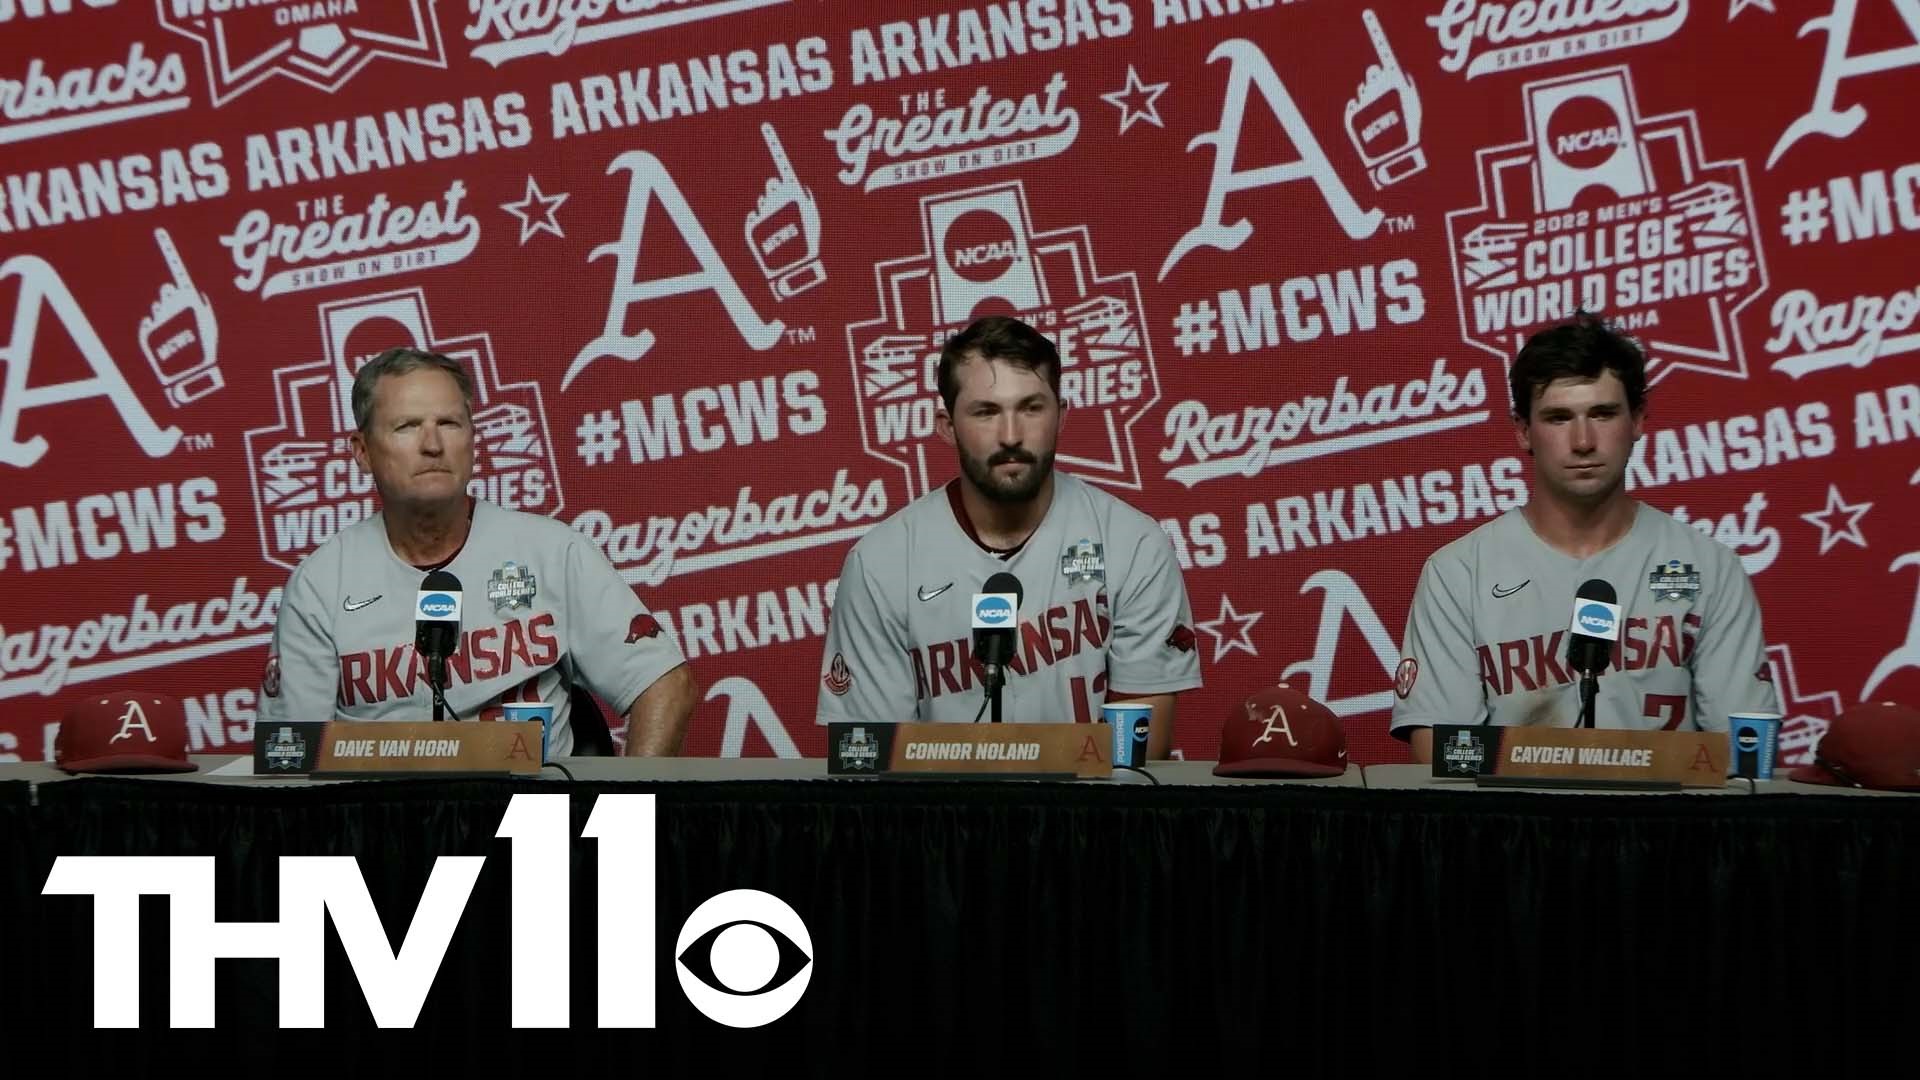 The Arkansas Razorbacks fell to the Ole Miss Rebels on Wednesday in their third matchup of the College World Series.